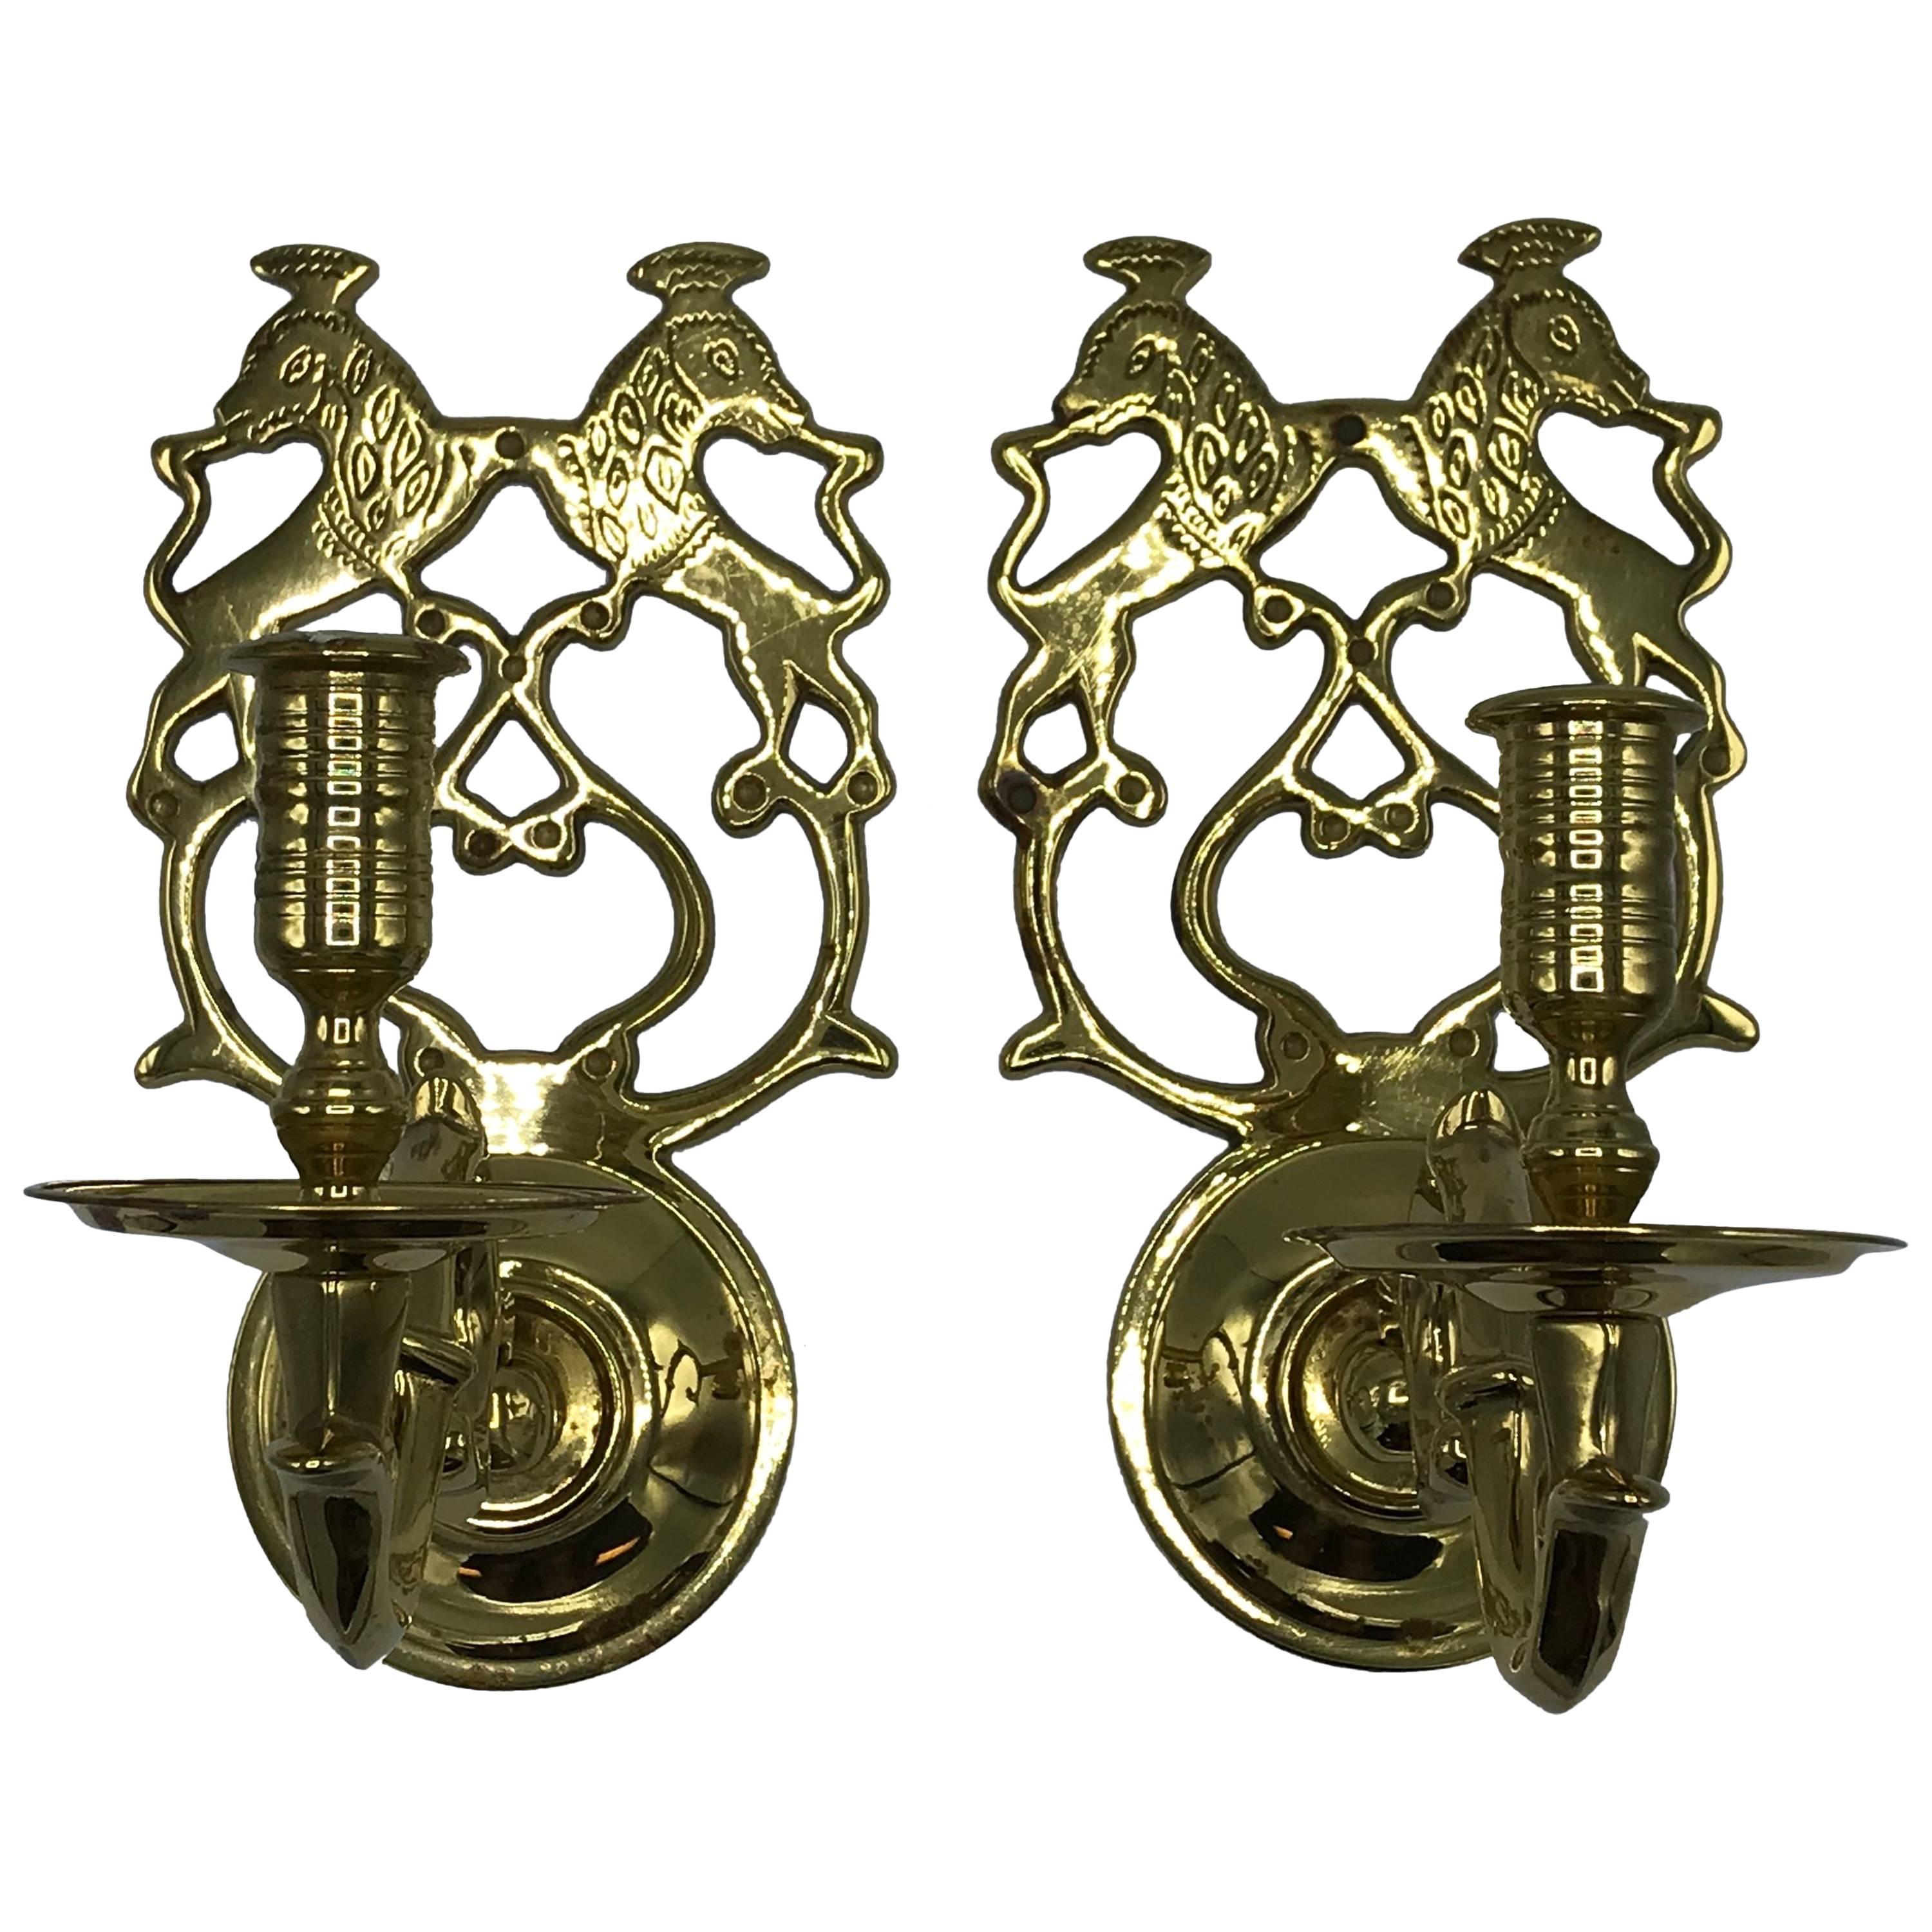 1960s Virginia Metalcrafters Single-Arm Candle Sconces with Crest Motif, Pair